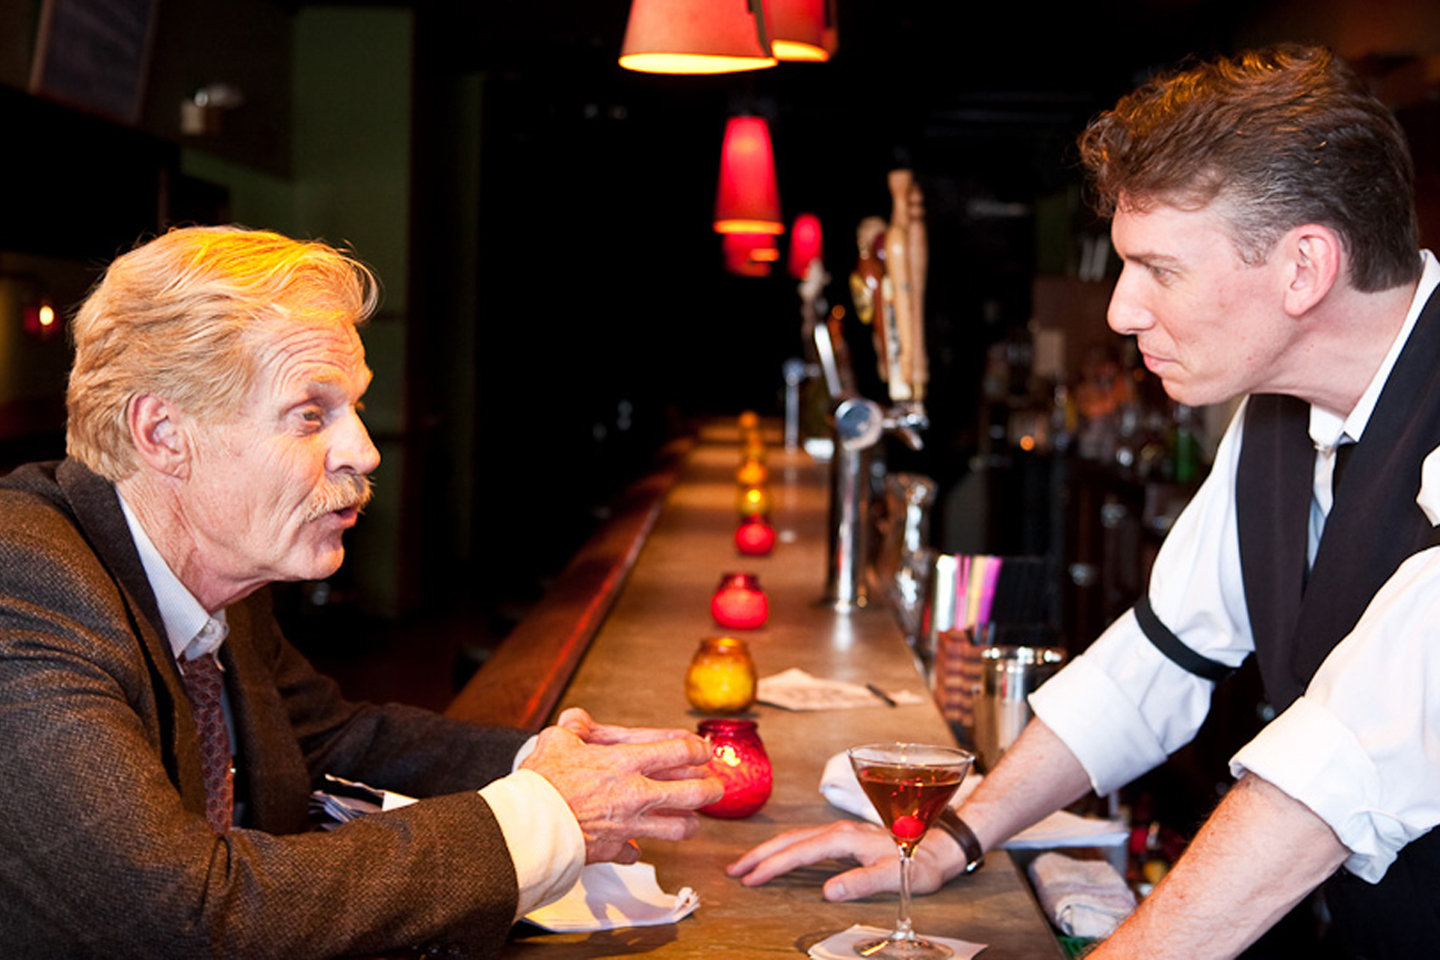 William (Danny Goldring) explains to Jimmy (Lawrence Grimm) about the modern state of being.